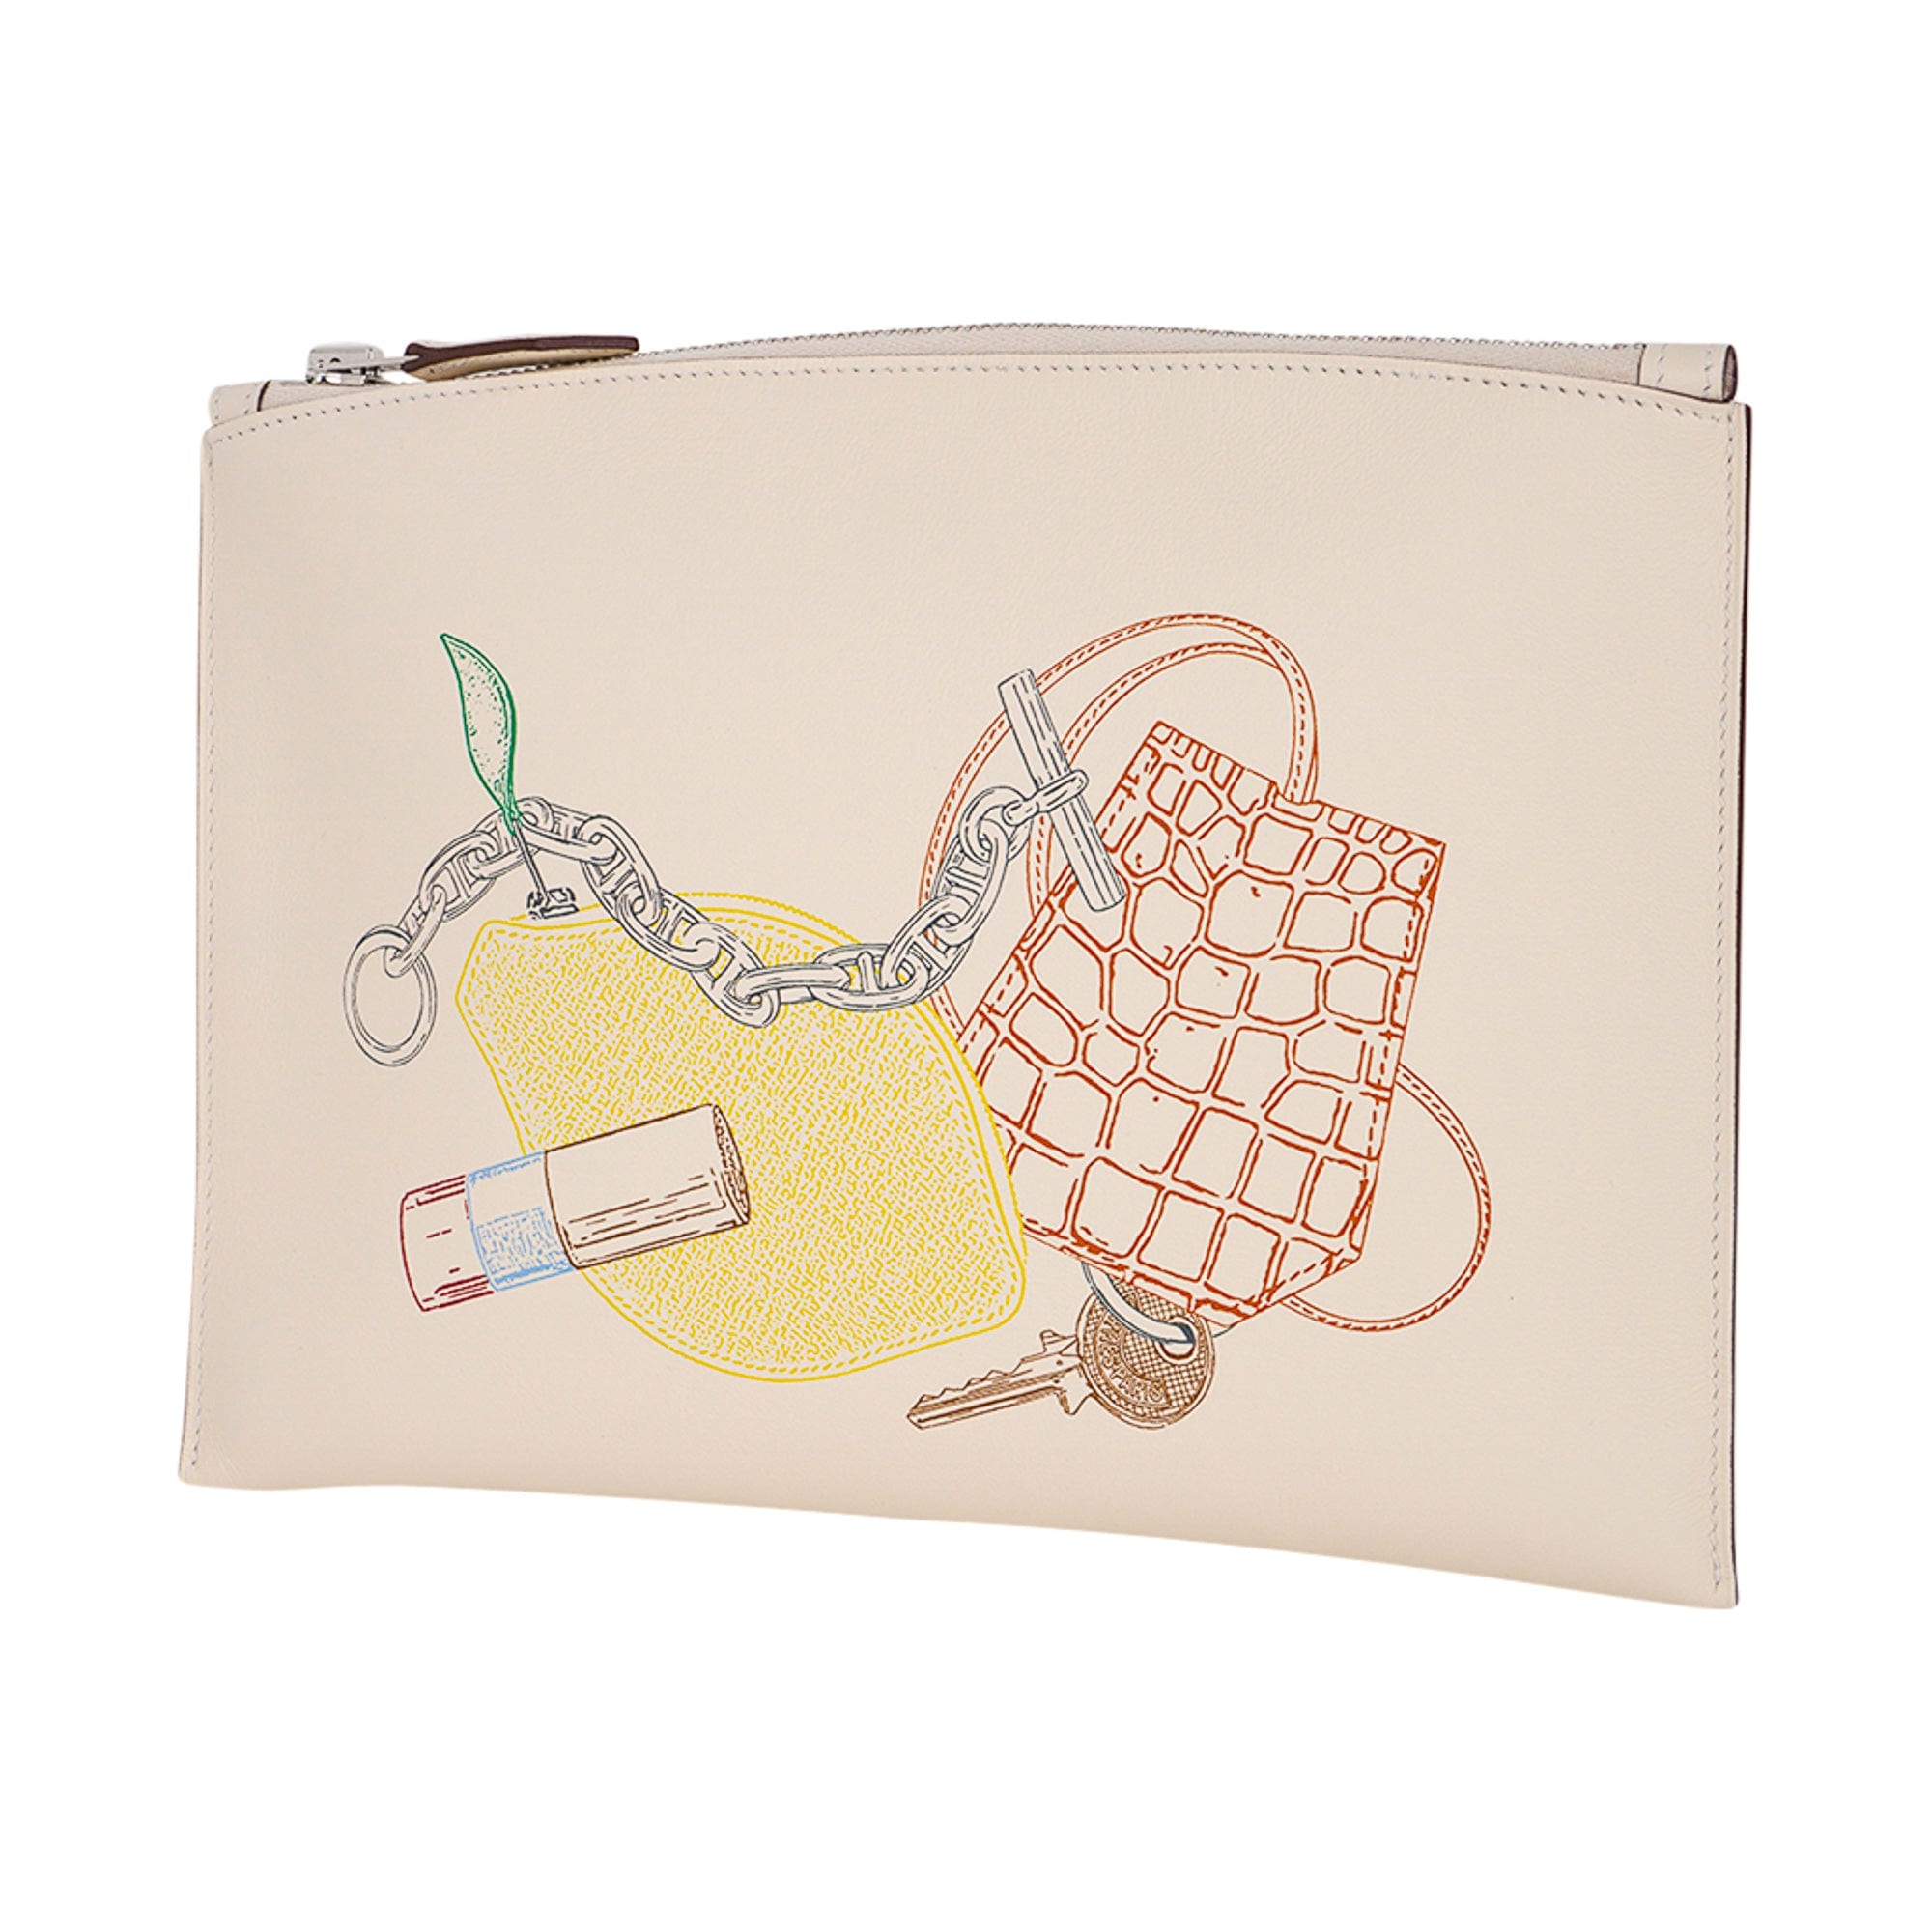 Hermes Clutch Bag in and Out Nata Vaux Swift U Stamp